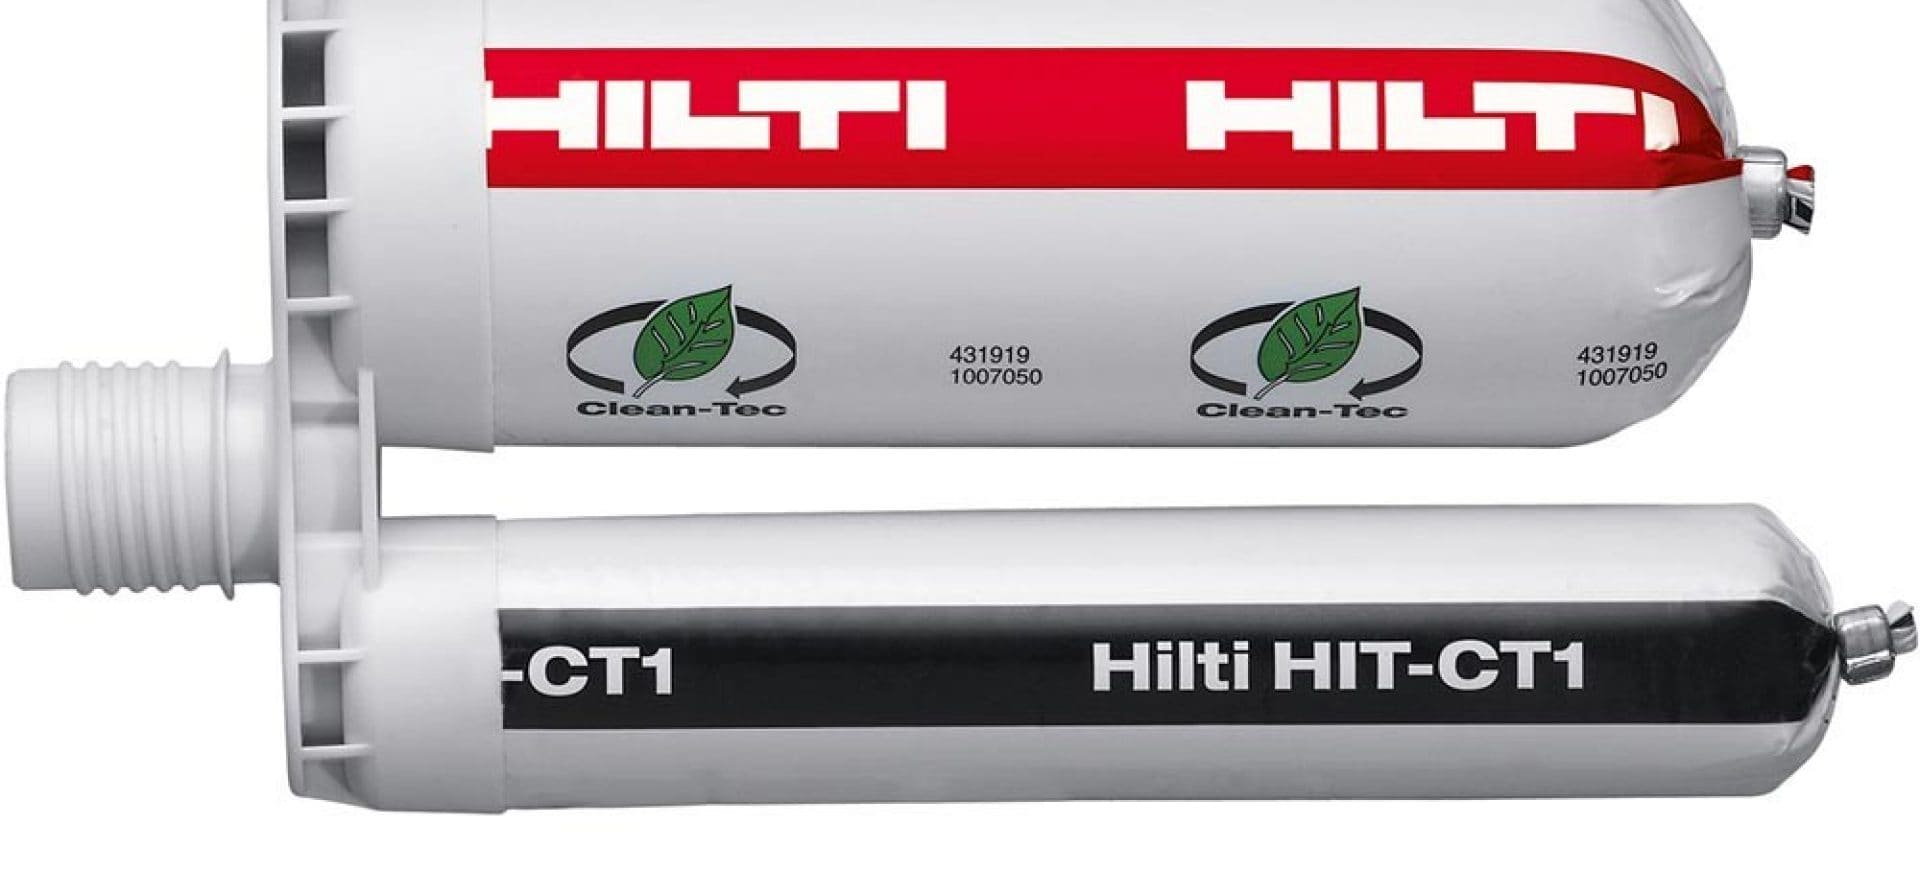 Hilti injectable mortar HIT-CT1